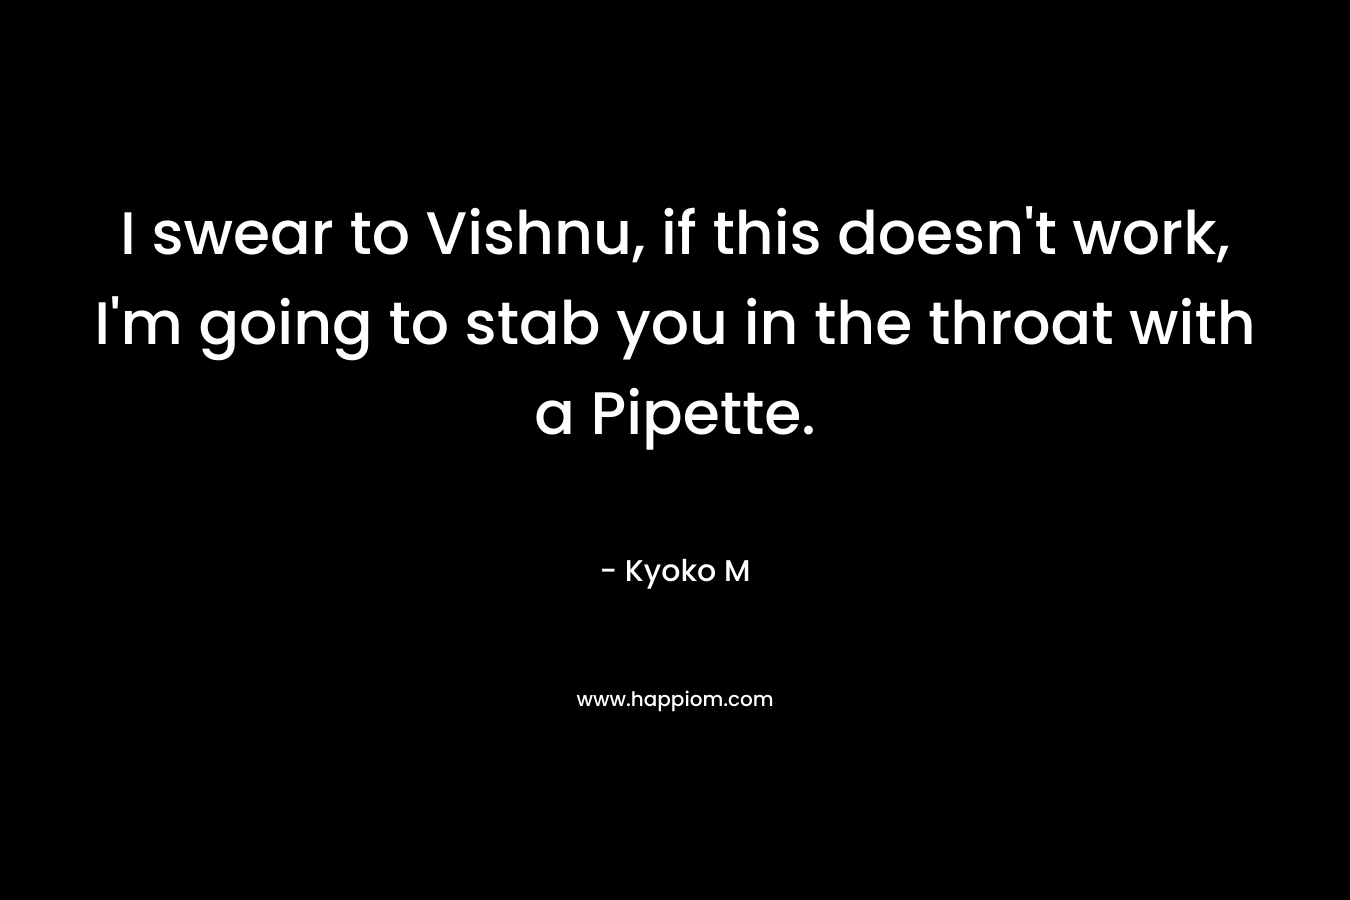 I swear to Vishnu, if this doesn’t work, I’m going to stab you in the throat with a Pipette. – Kyoko M